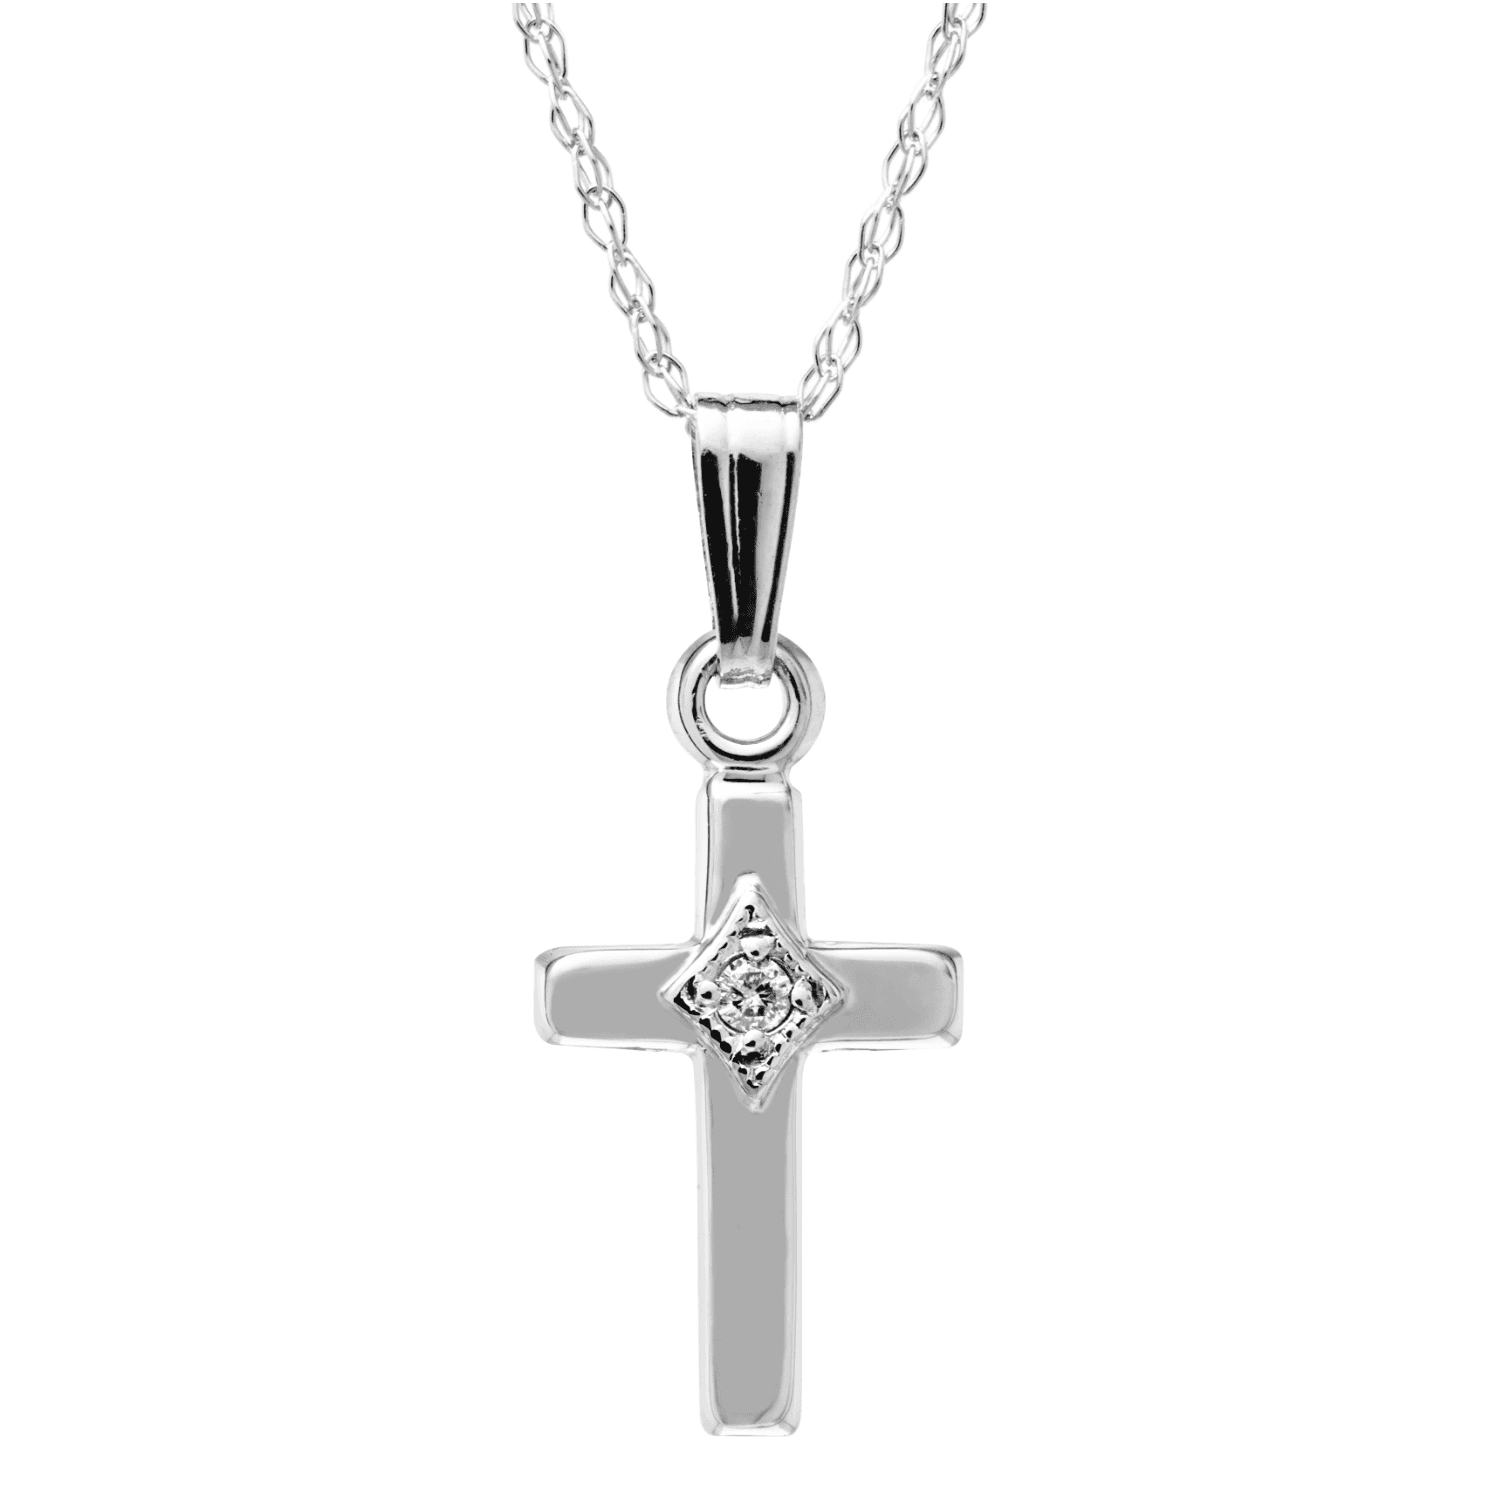 Child's 14k White Gold Cross Necklace with Diamond